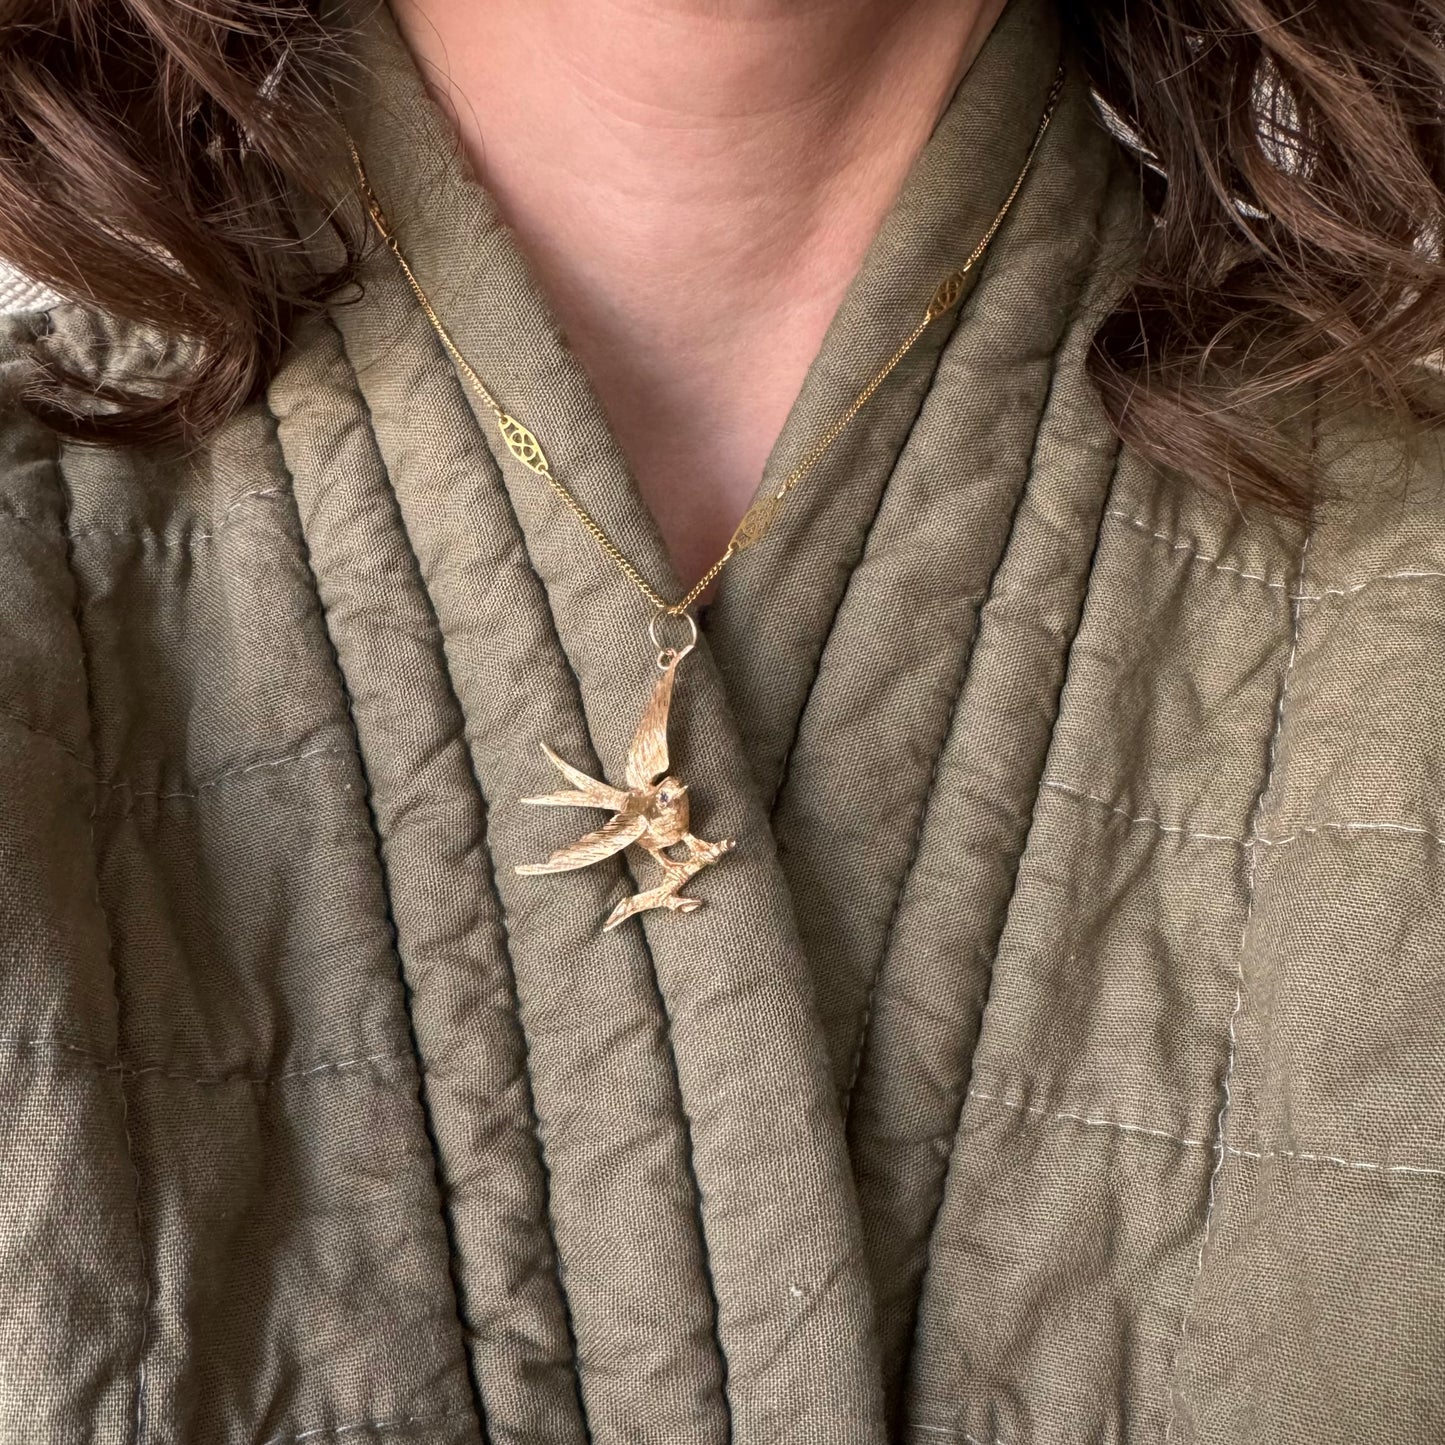 reimagined V I N T A G E // winged delight / 14k and sapphire mid century statement swallow / a conversion pendant